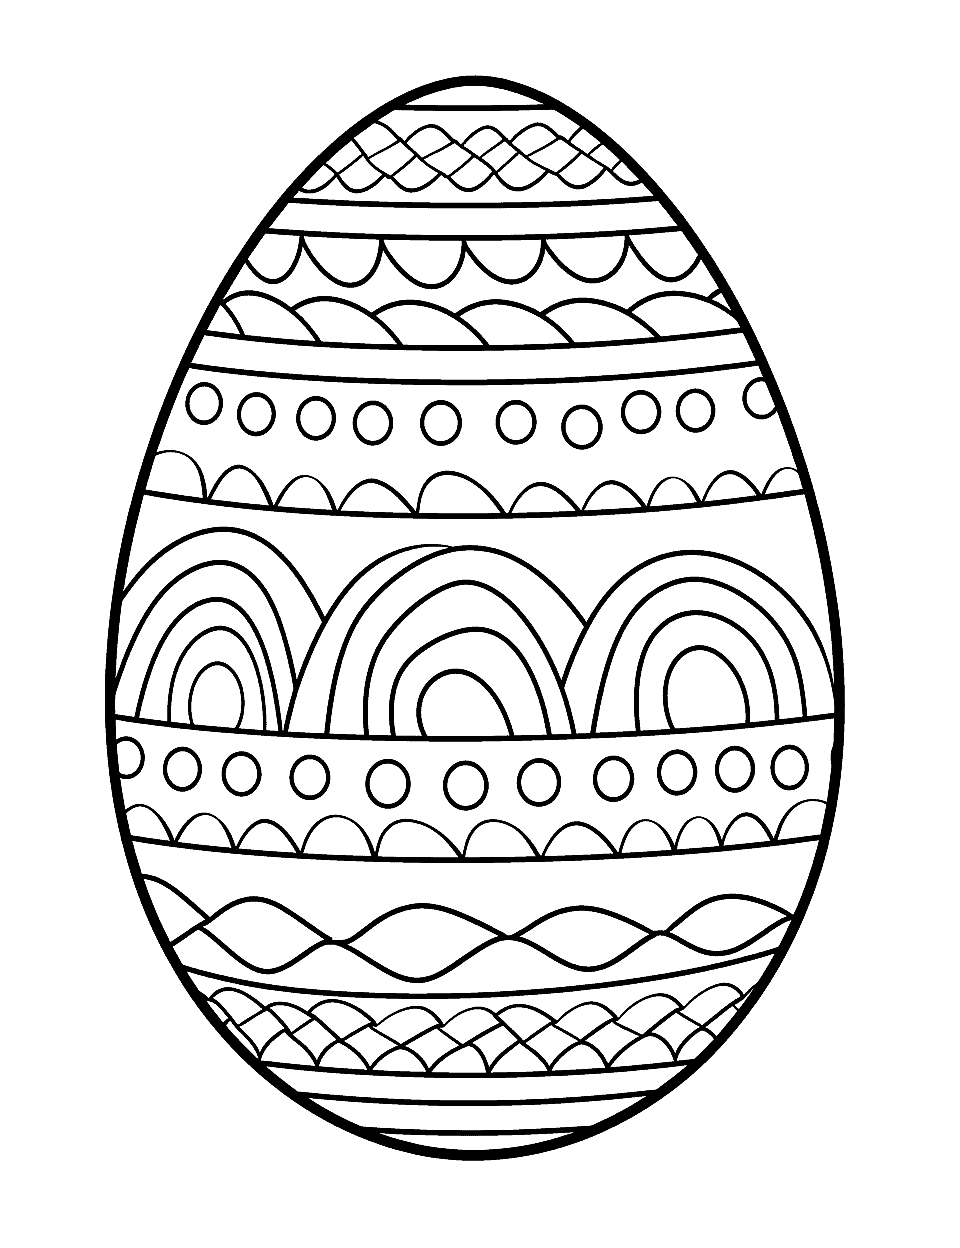 Easy Easter Egg Coloring Page - A simple Easter egg design with patterns and dots for easy coloring.